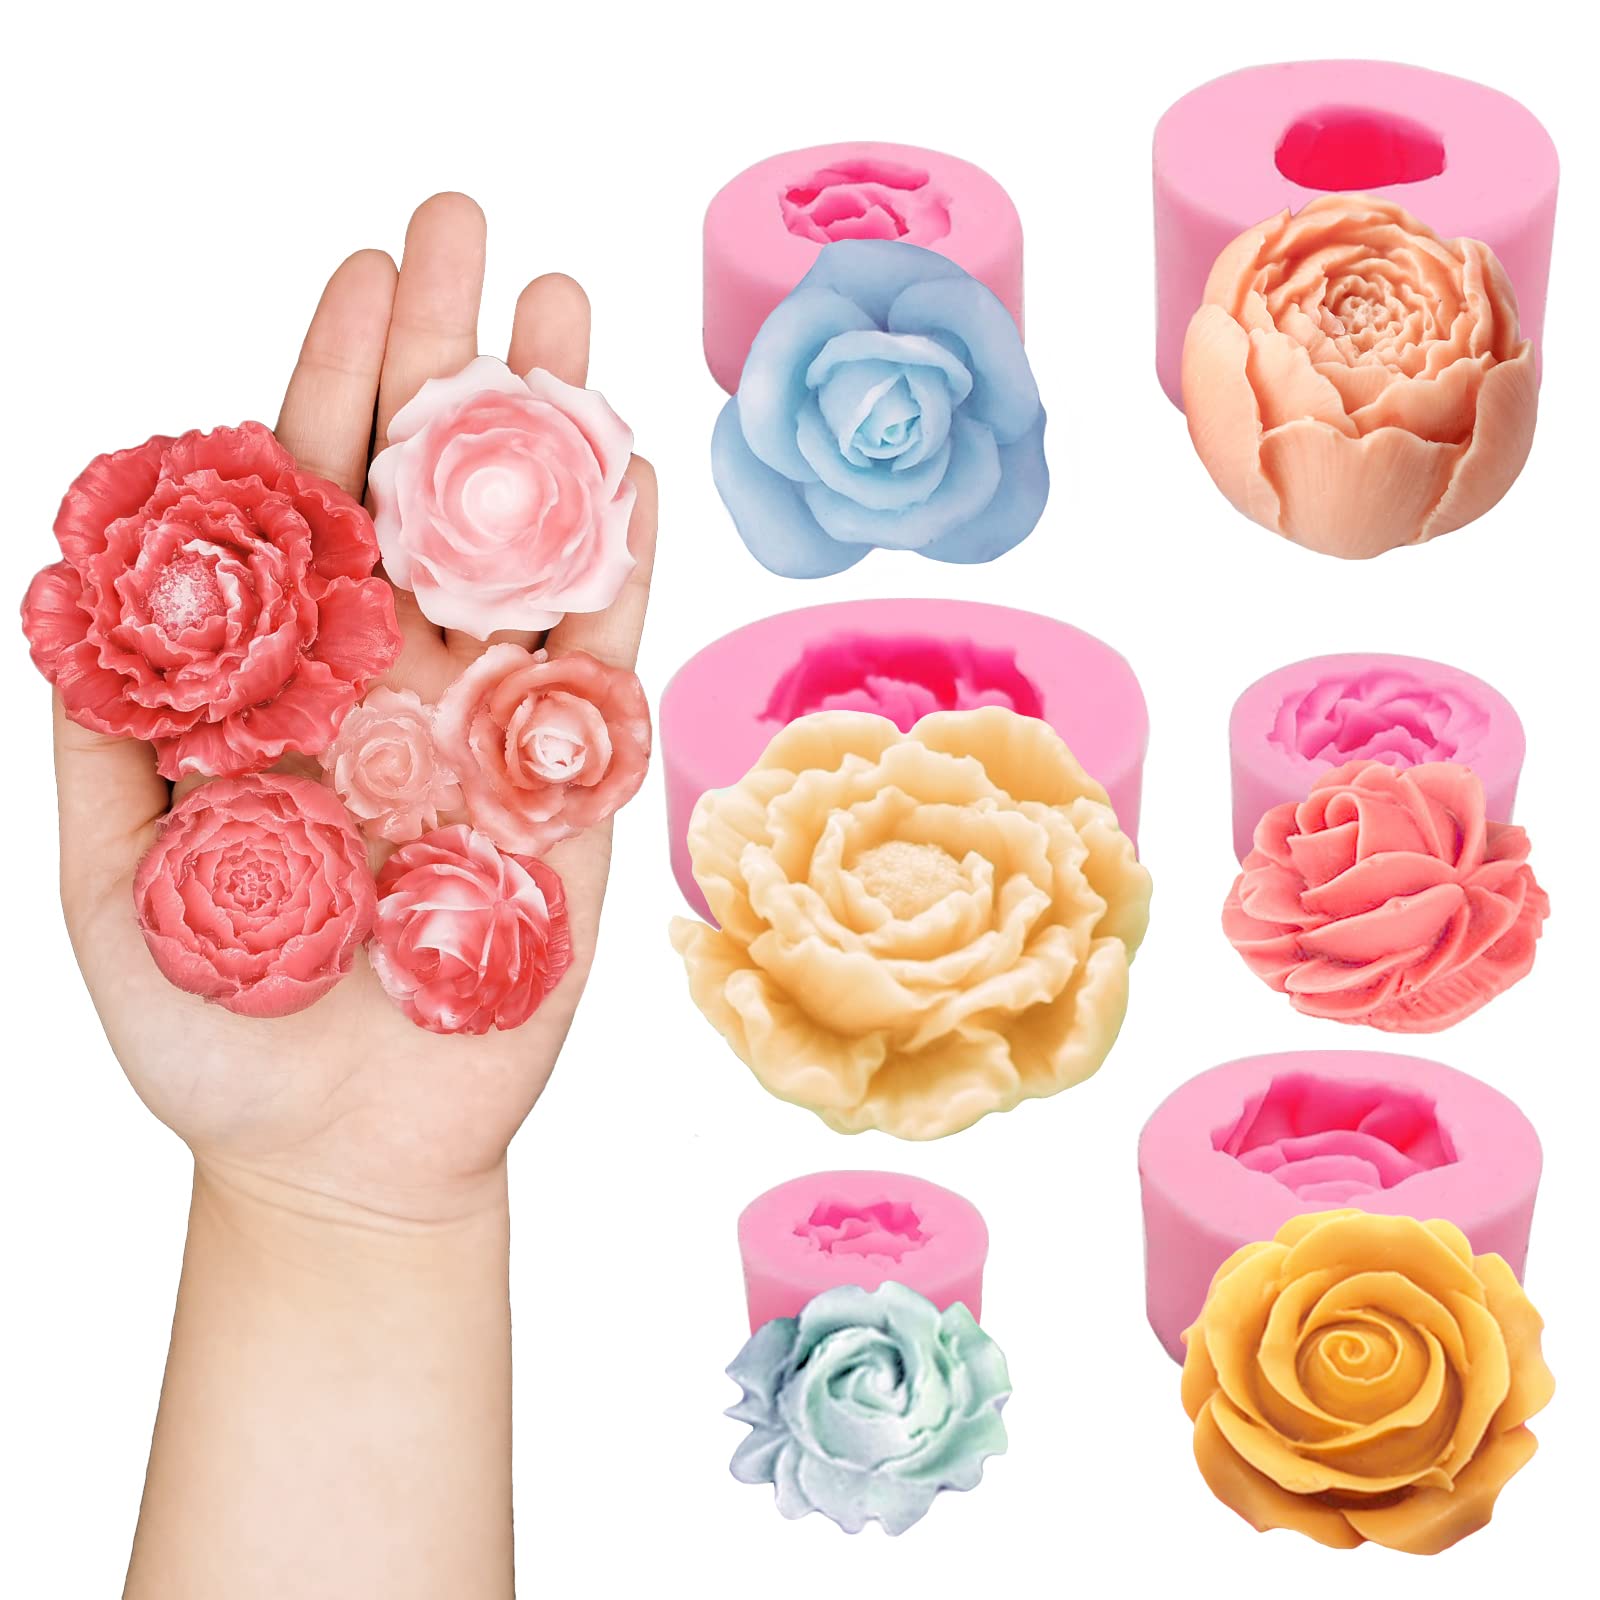 3D Flower Silicone Candle Mold Aesthetic New Handmade DIY Pillar Scented Candles  Making Kit Chocolate Cake Fondant Mould - AliExpress